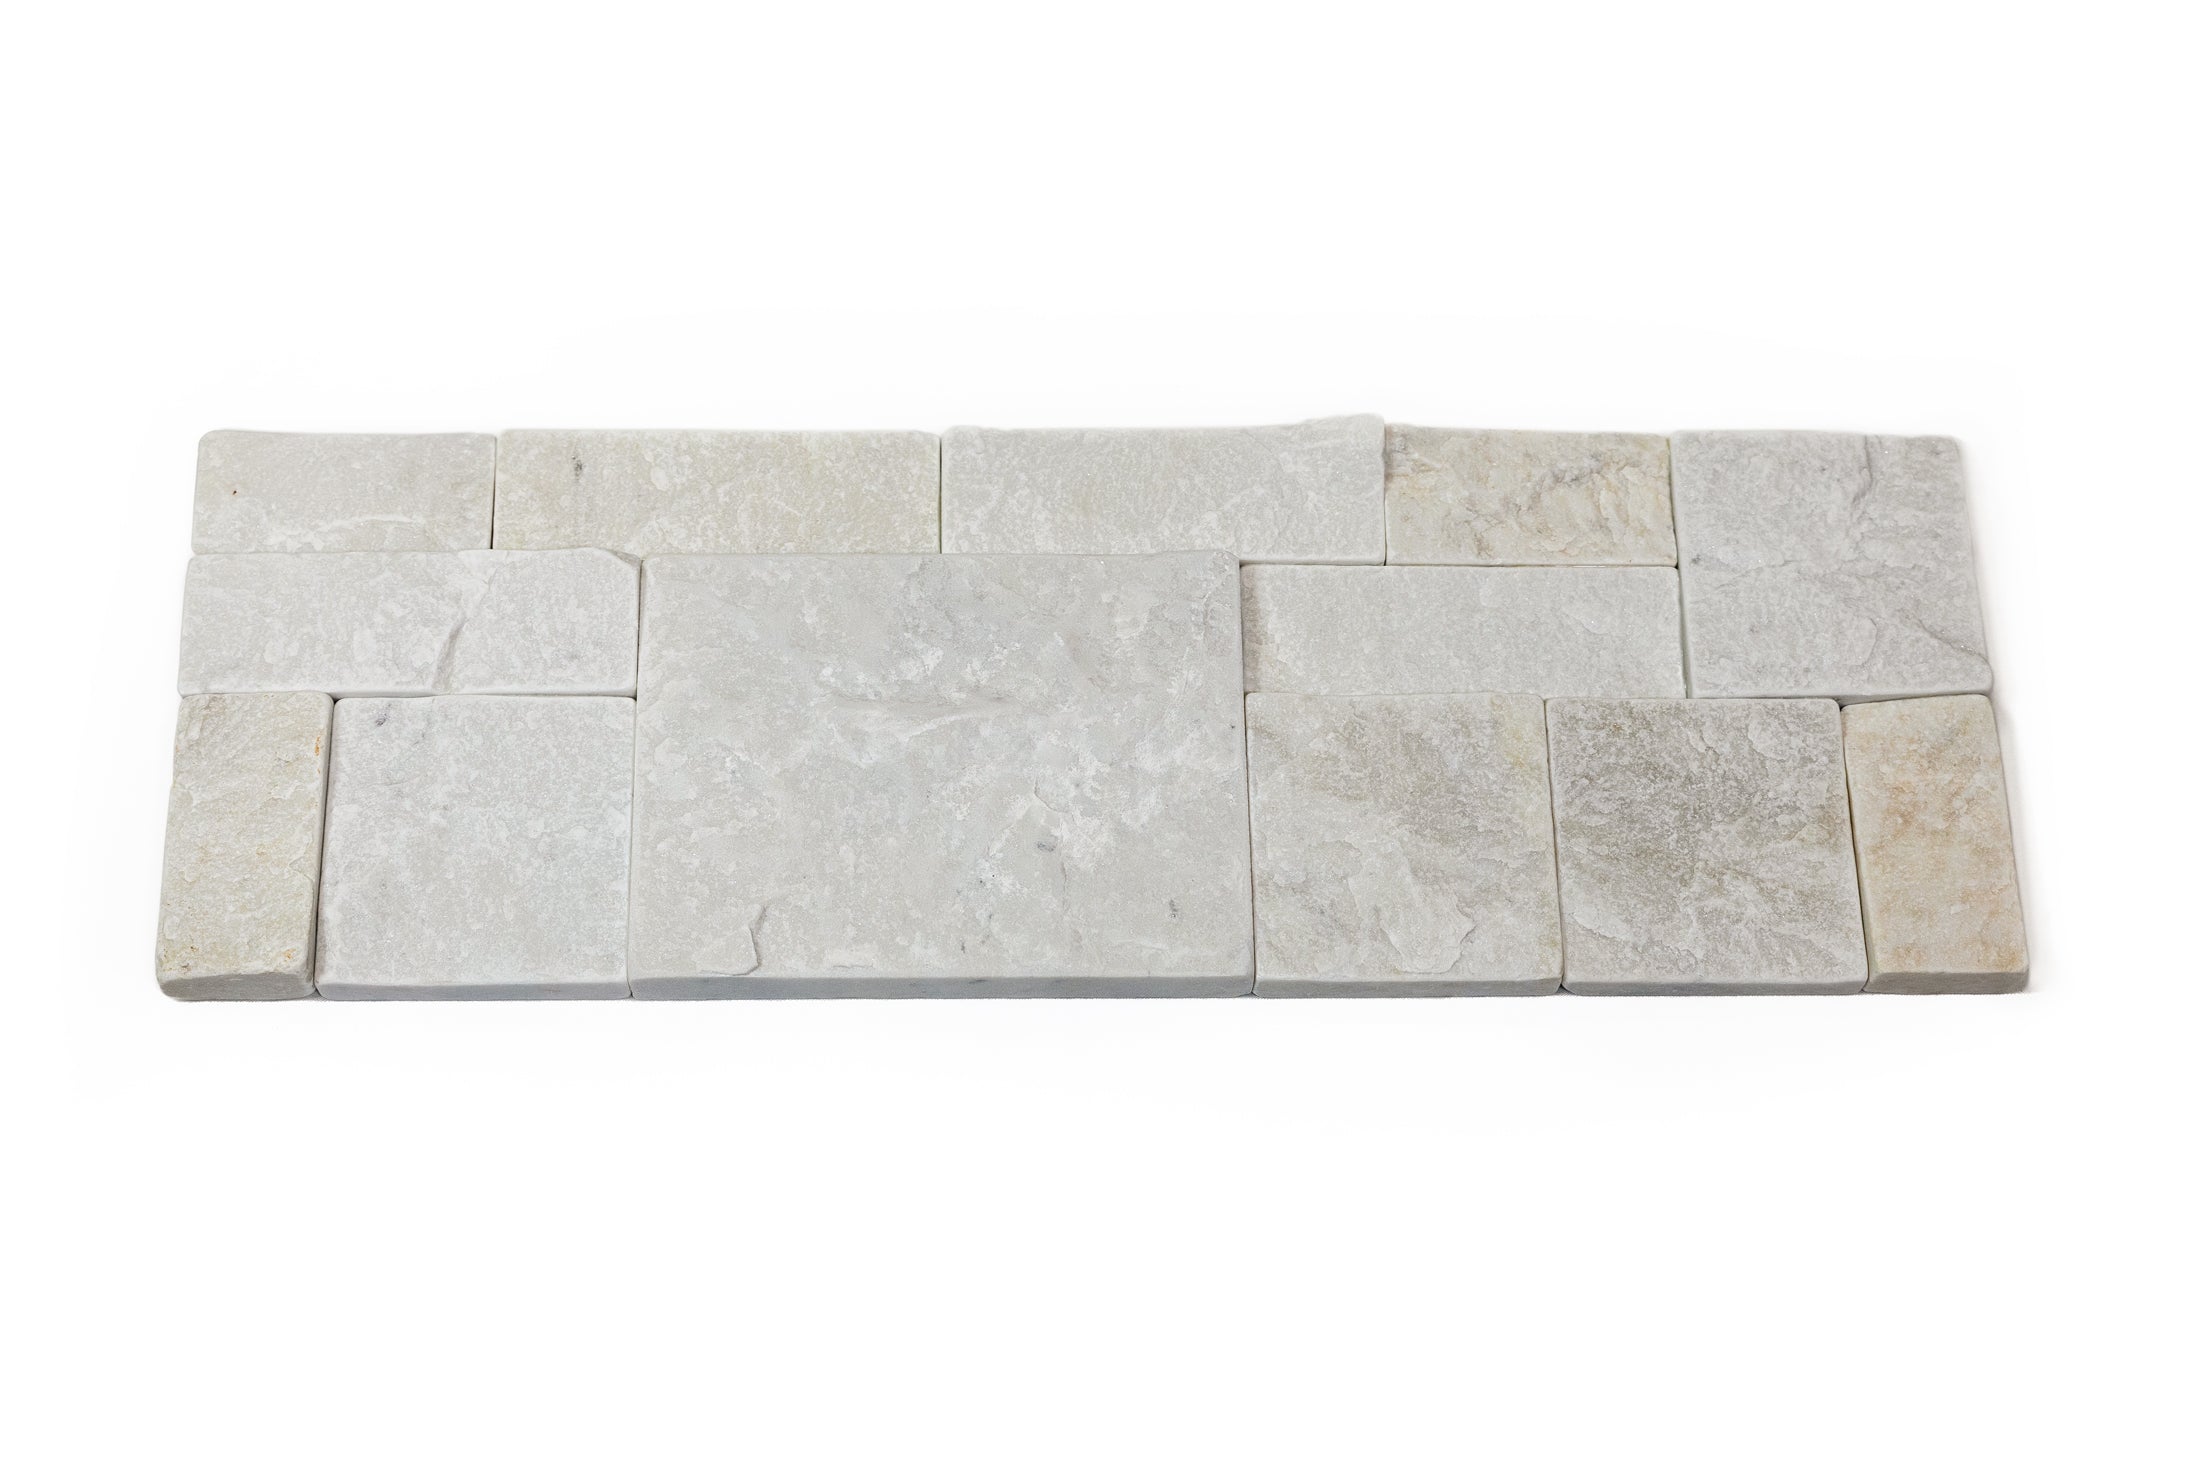 Natural Stacked Stone Wall Cladding Panels - Tumbled Milky White Montage